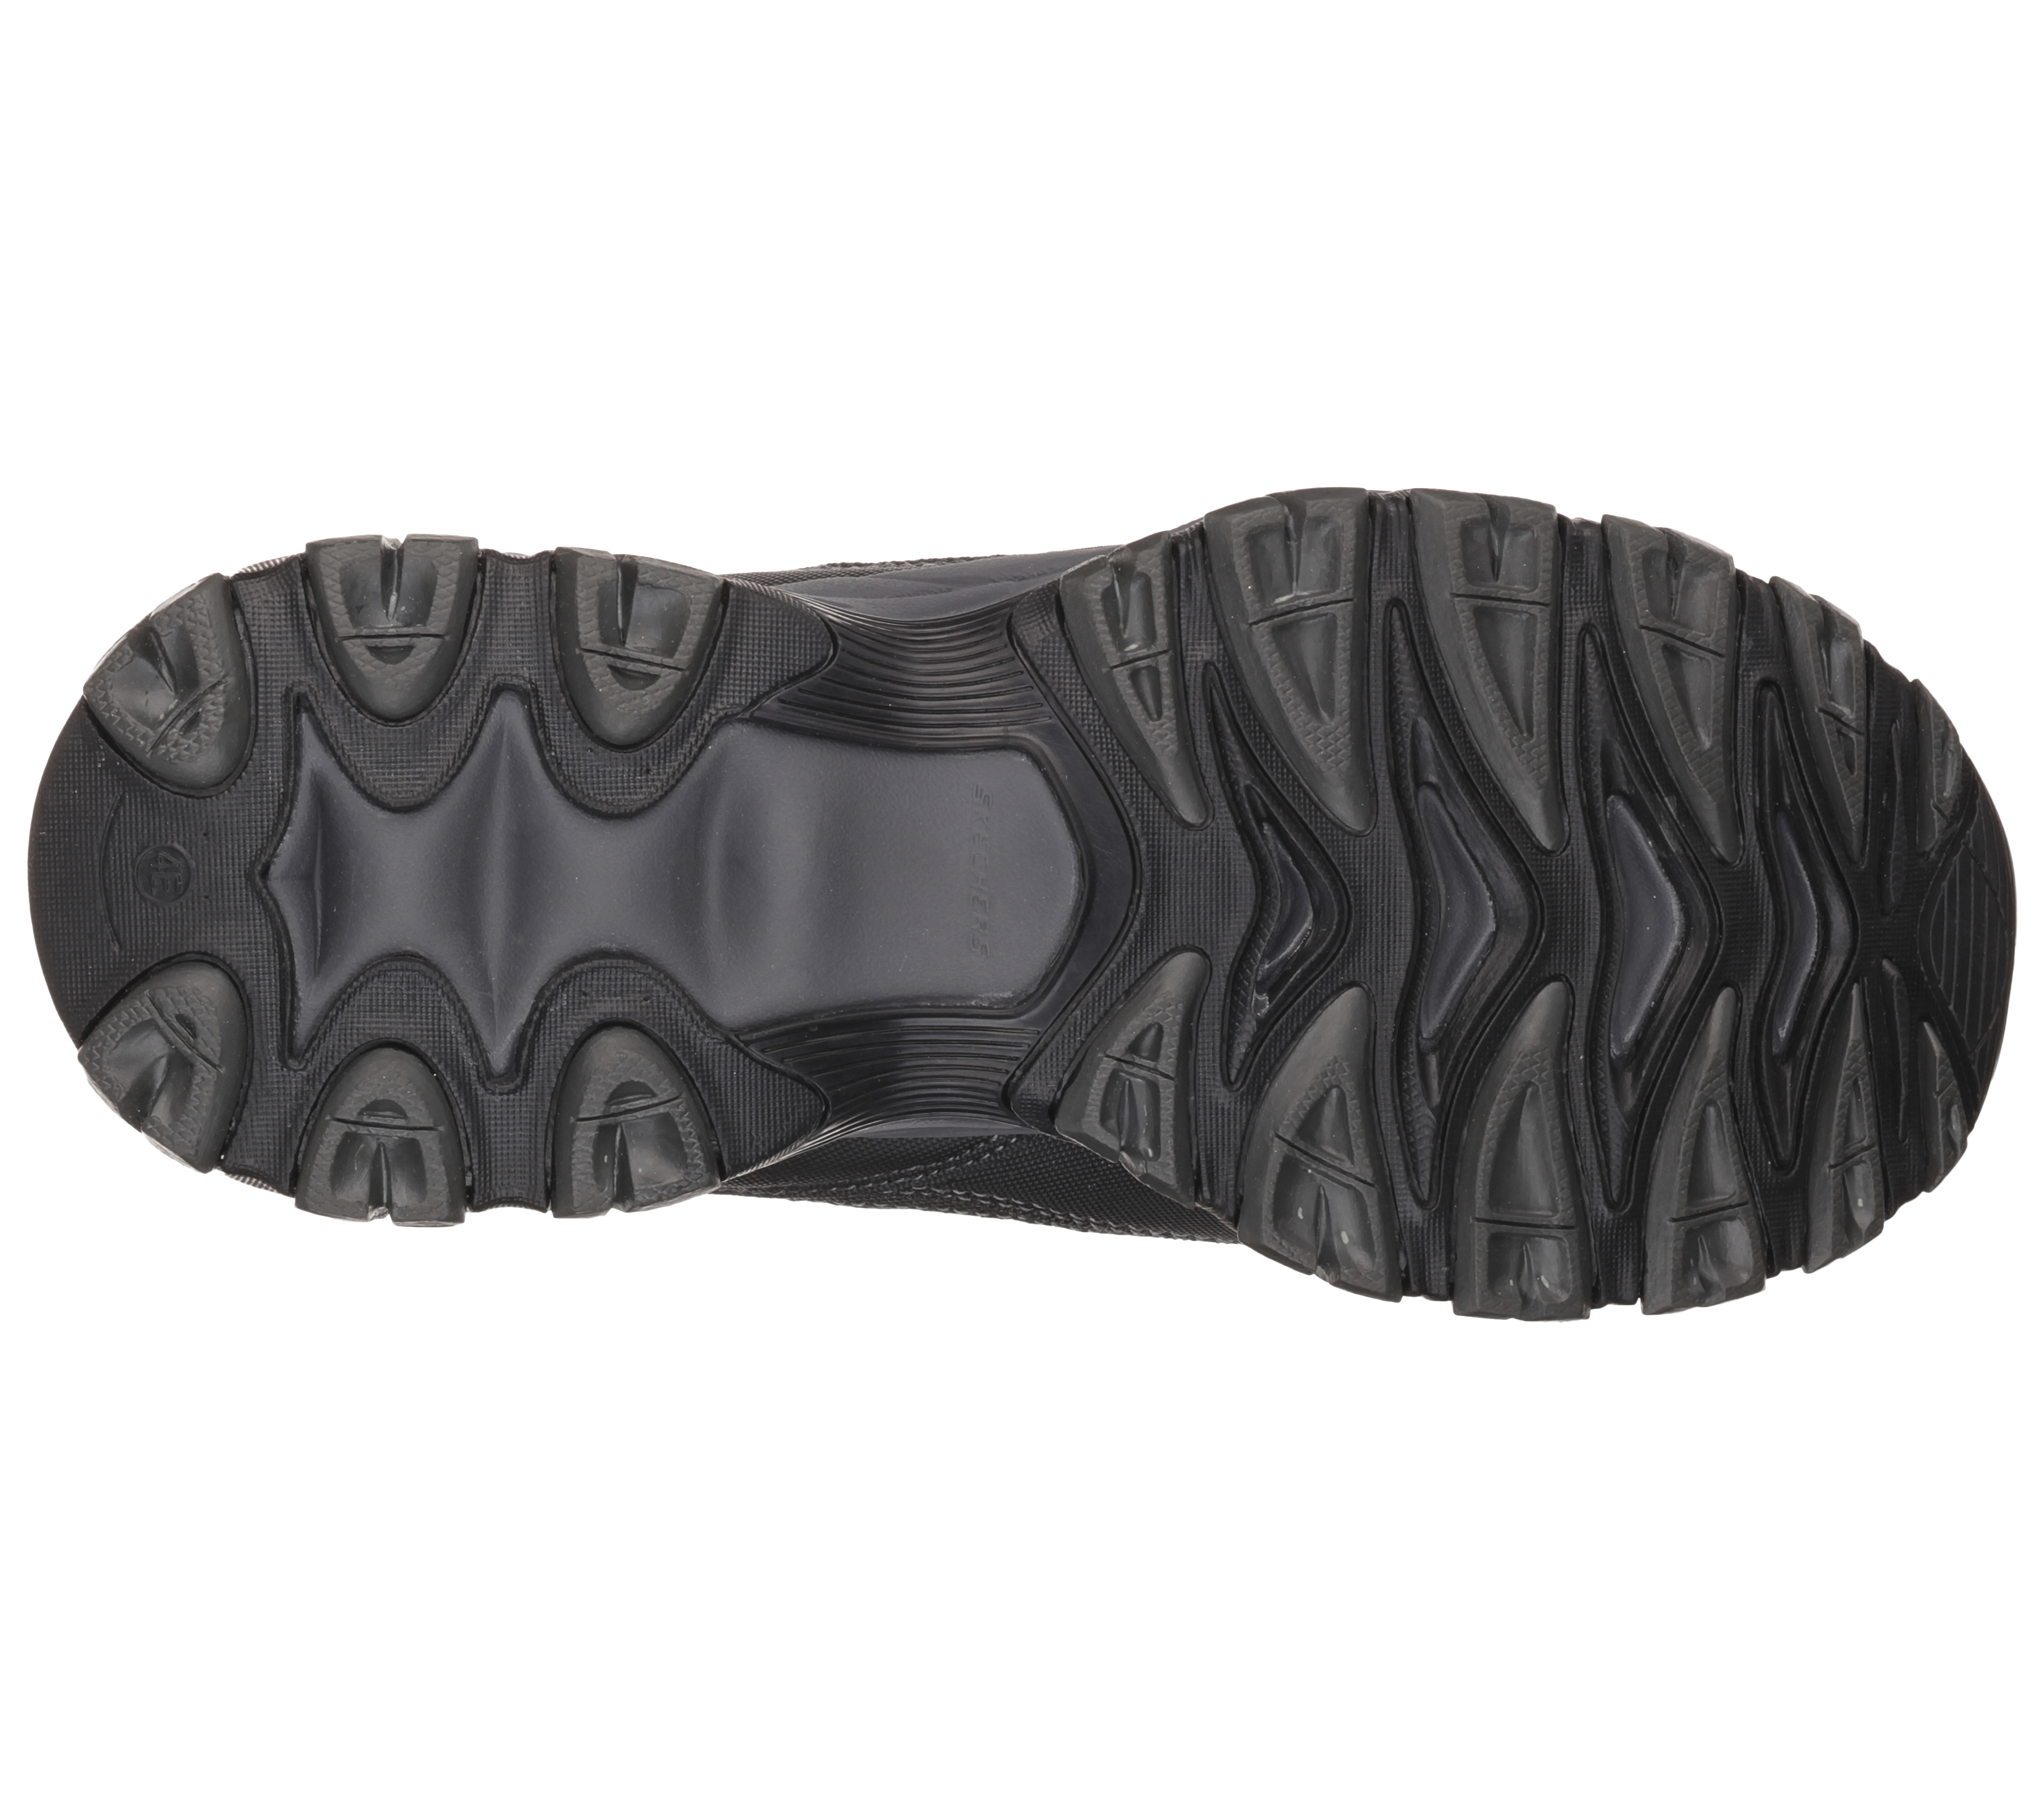 skechers cankton review